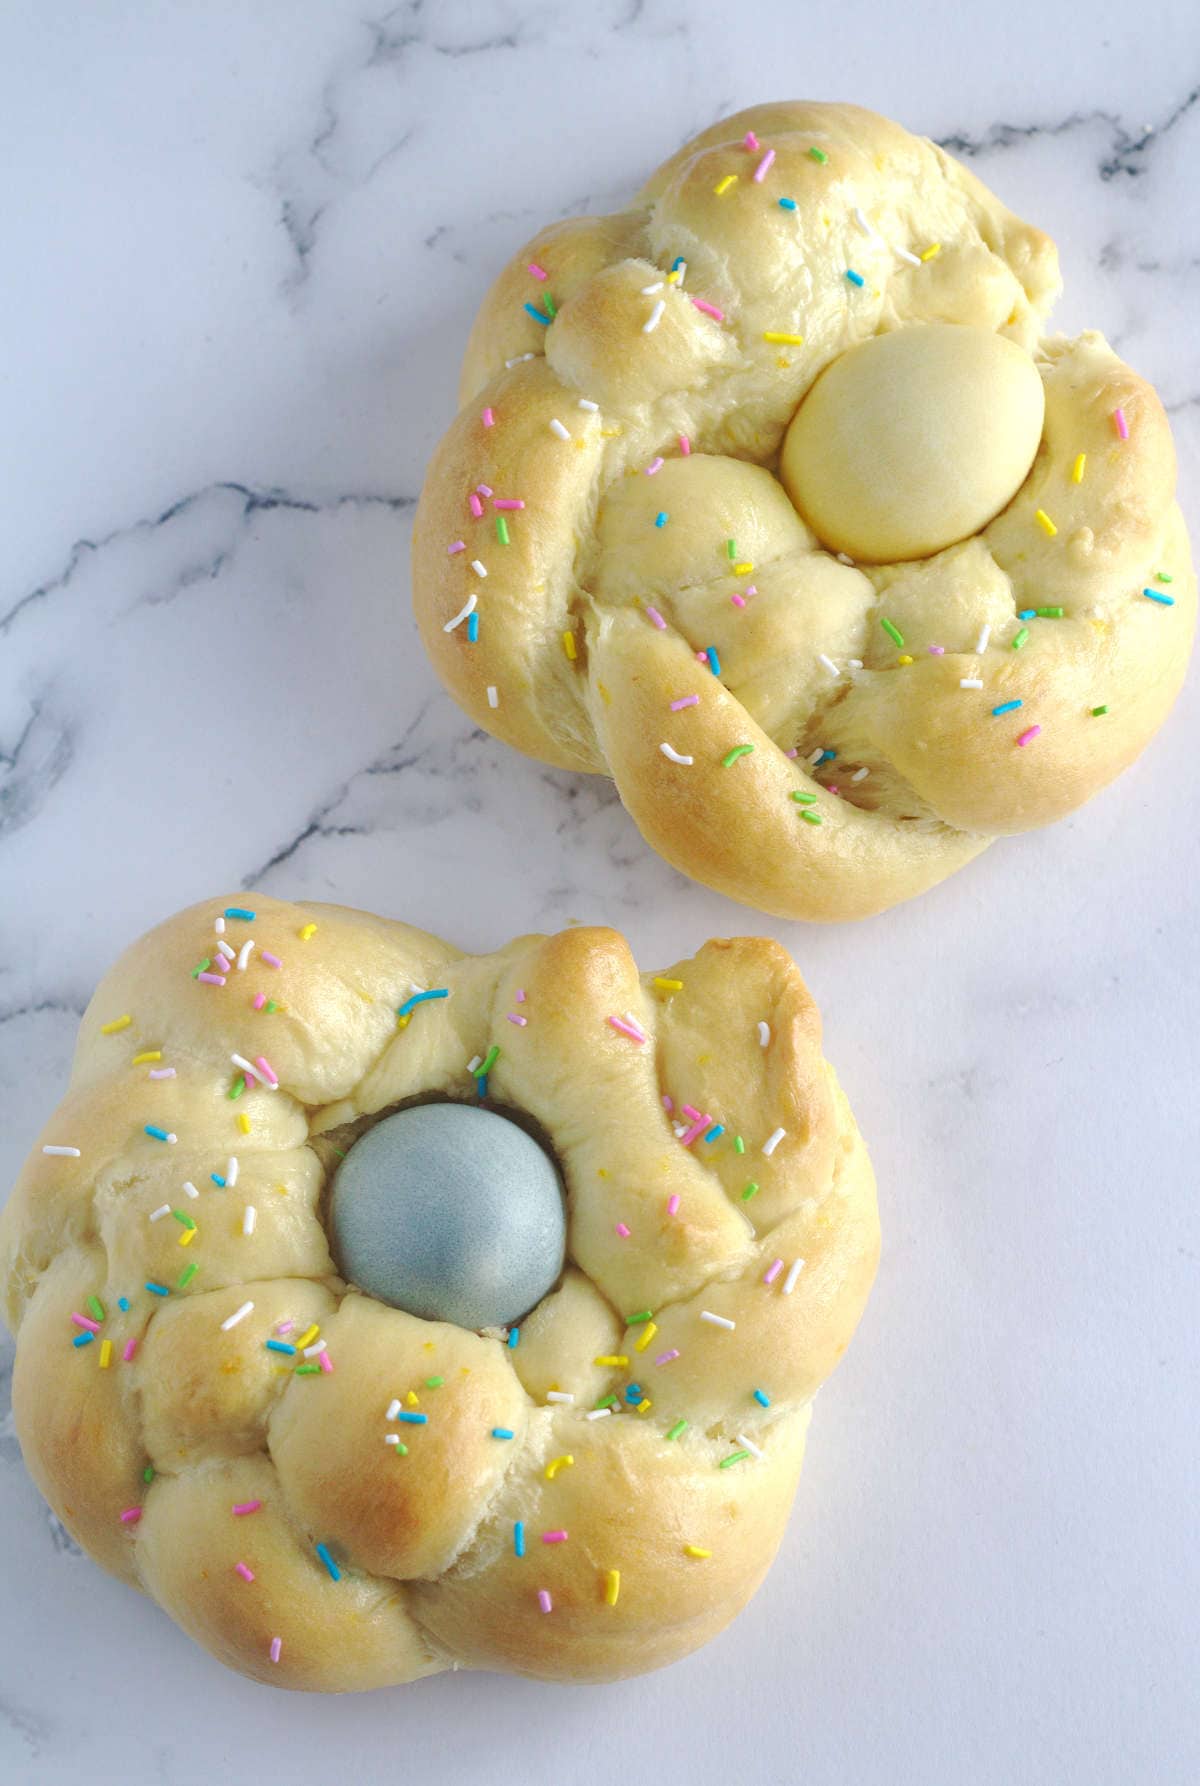 Two Italian Easter bread wreaths with dyed eggs in their middles.  